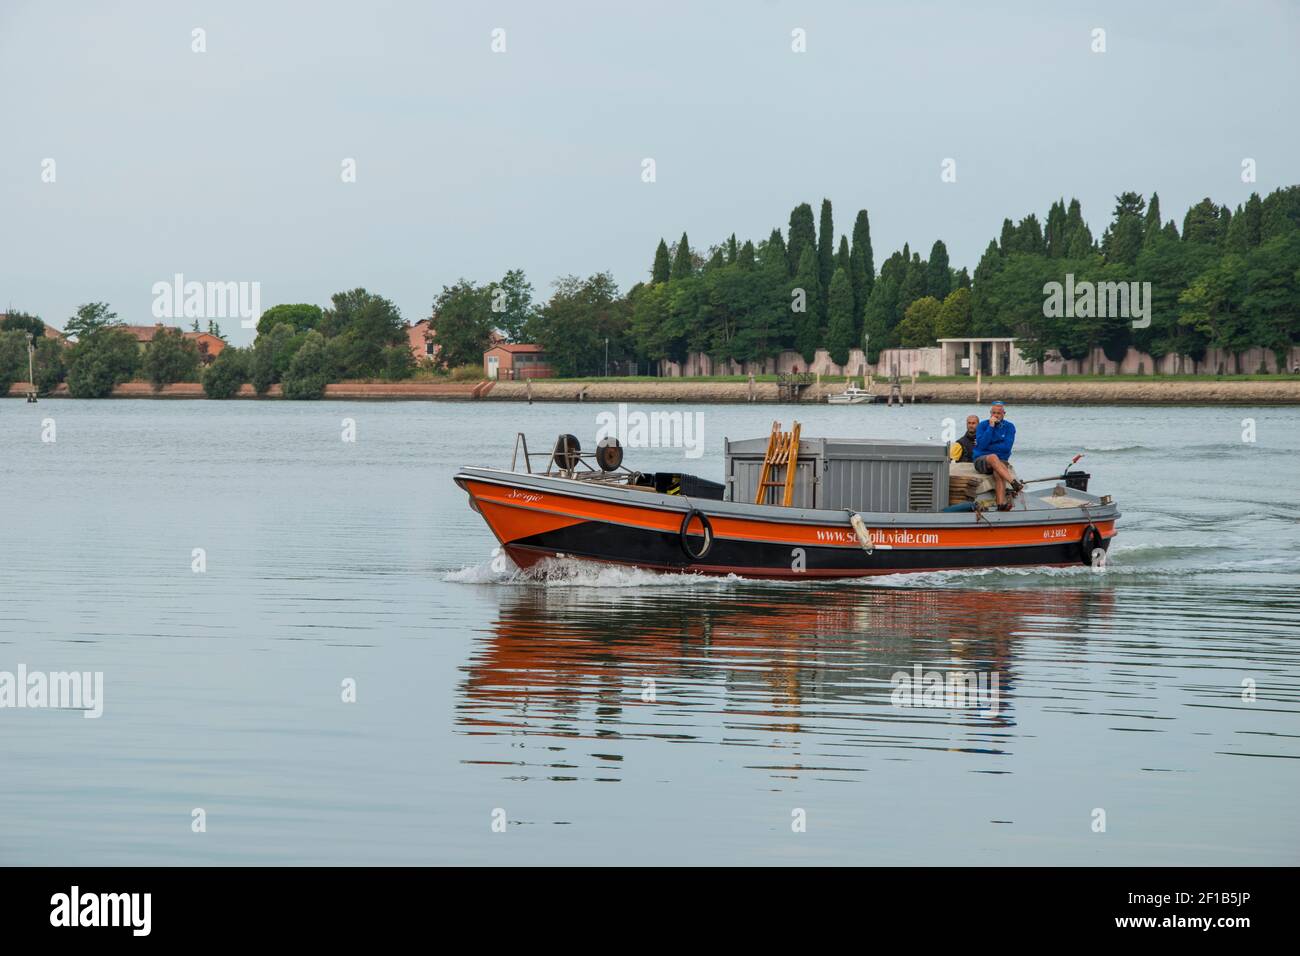 Cargo boat for trade in the canals of the city of Venice, Italy, Europe. Stock Photo